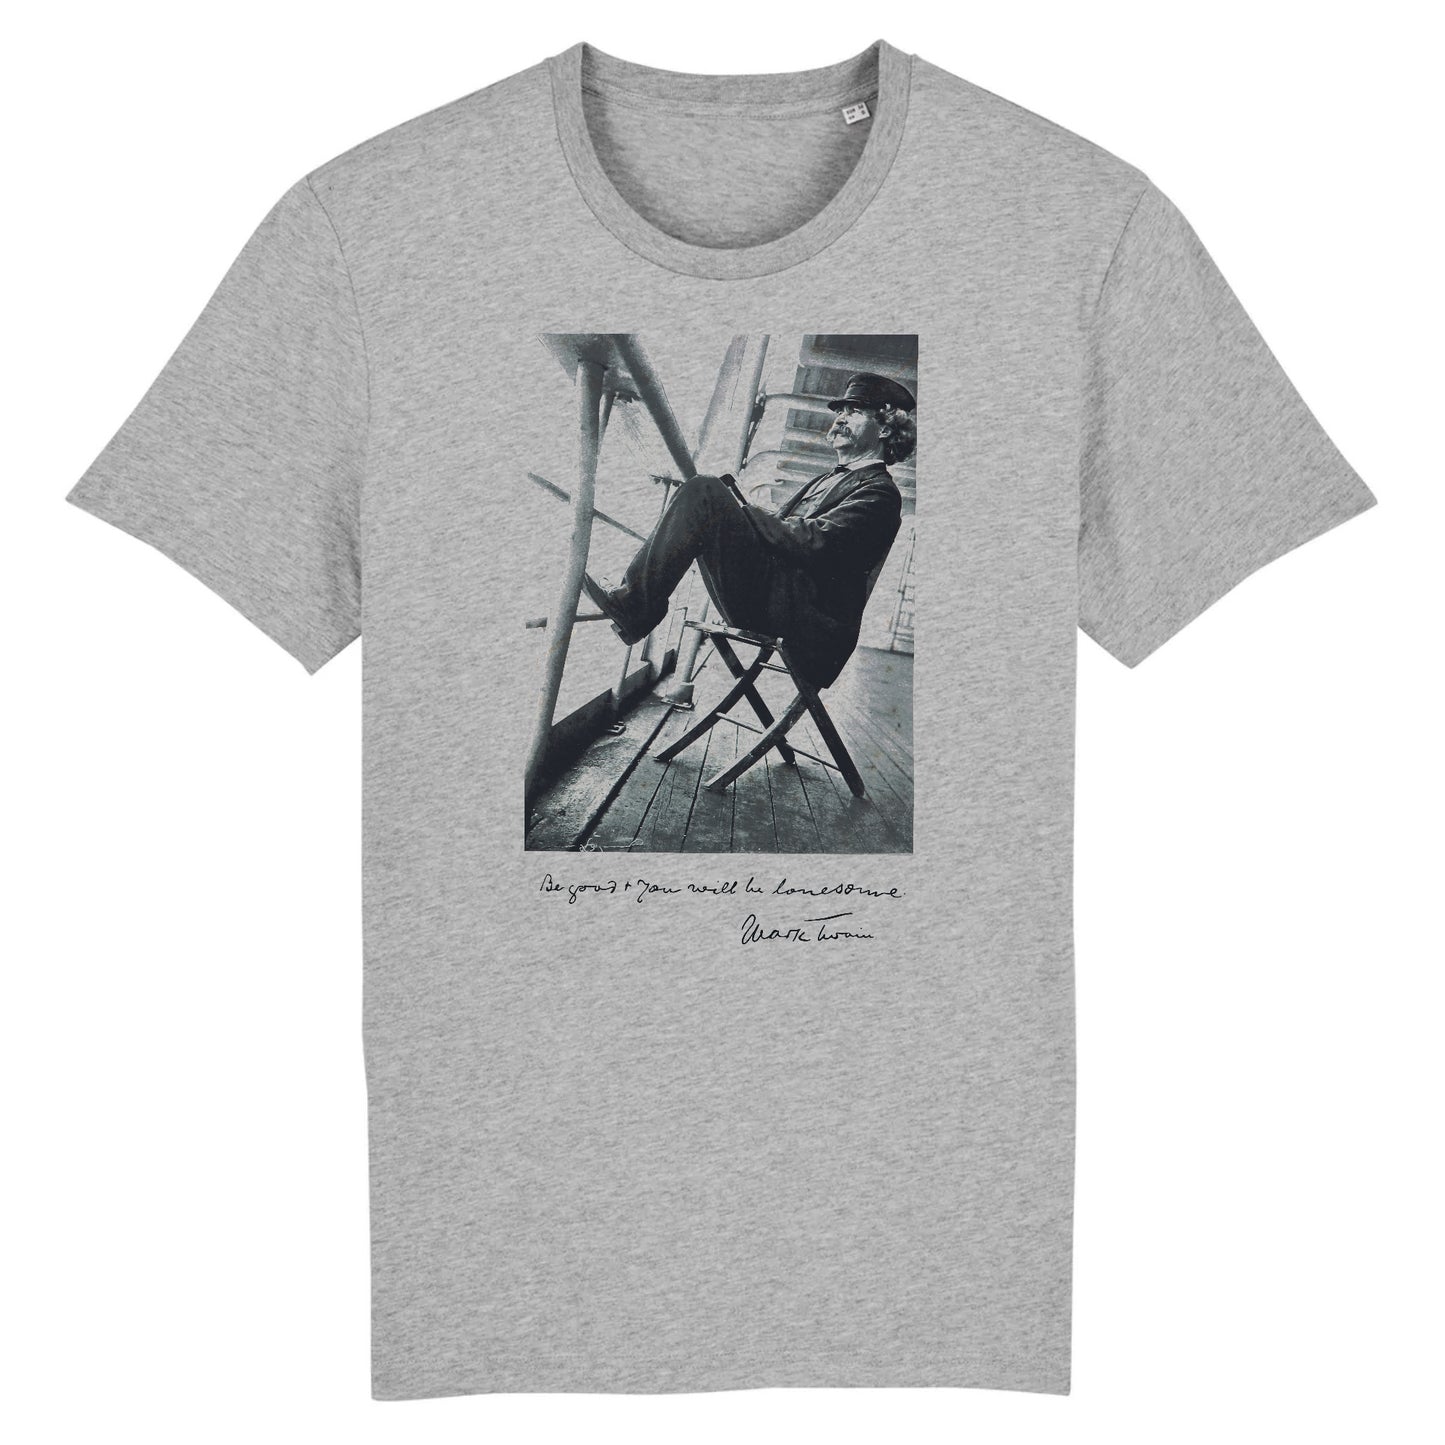 Be Good and you Will be Lonesome by Mark Twain, 1897 - Organic Cotton T-Shirt